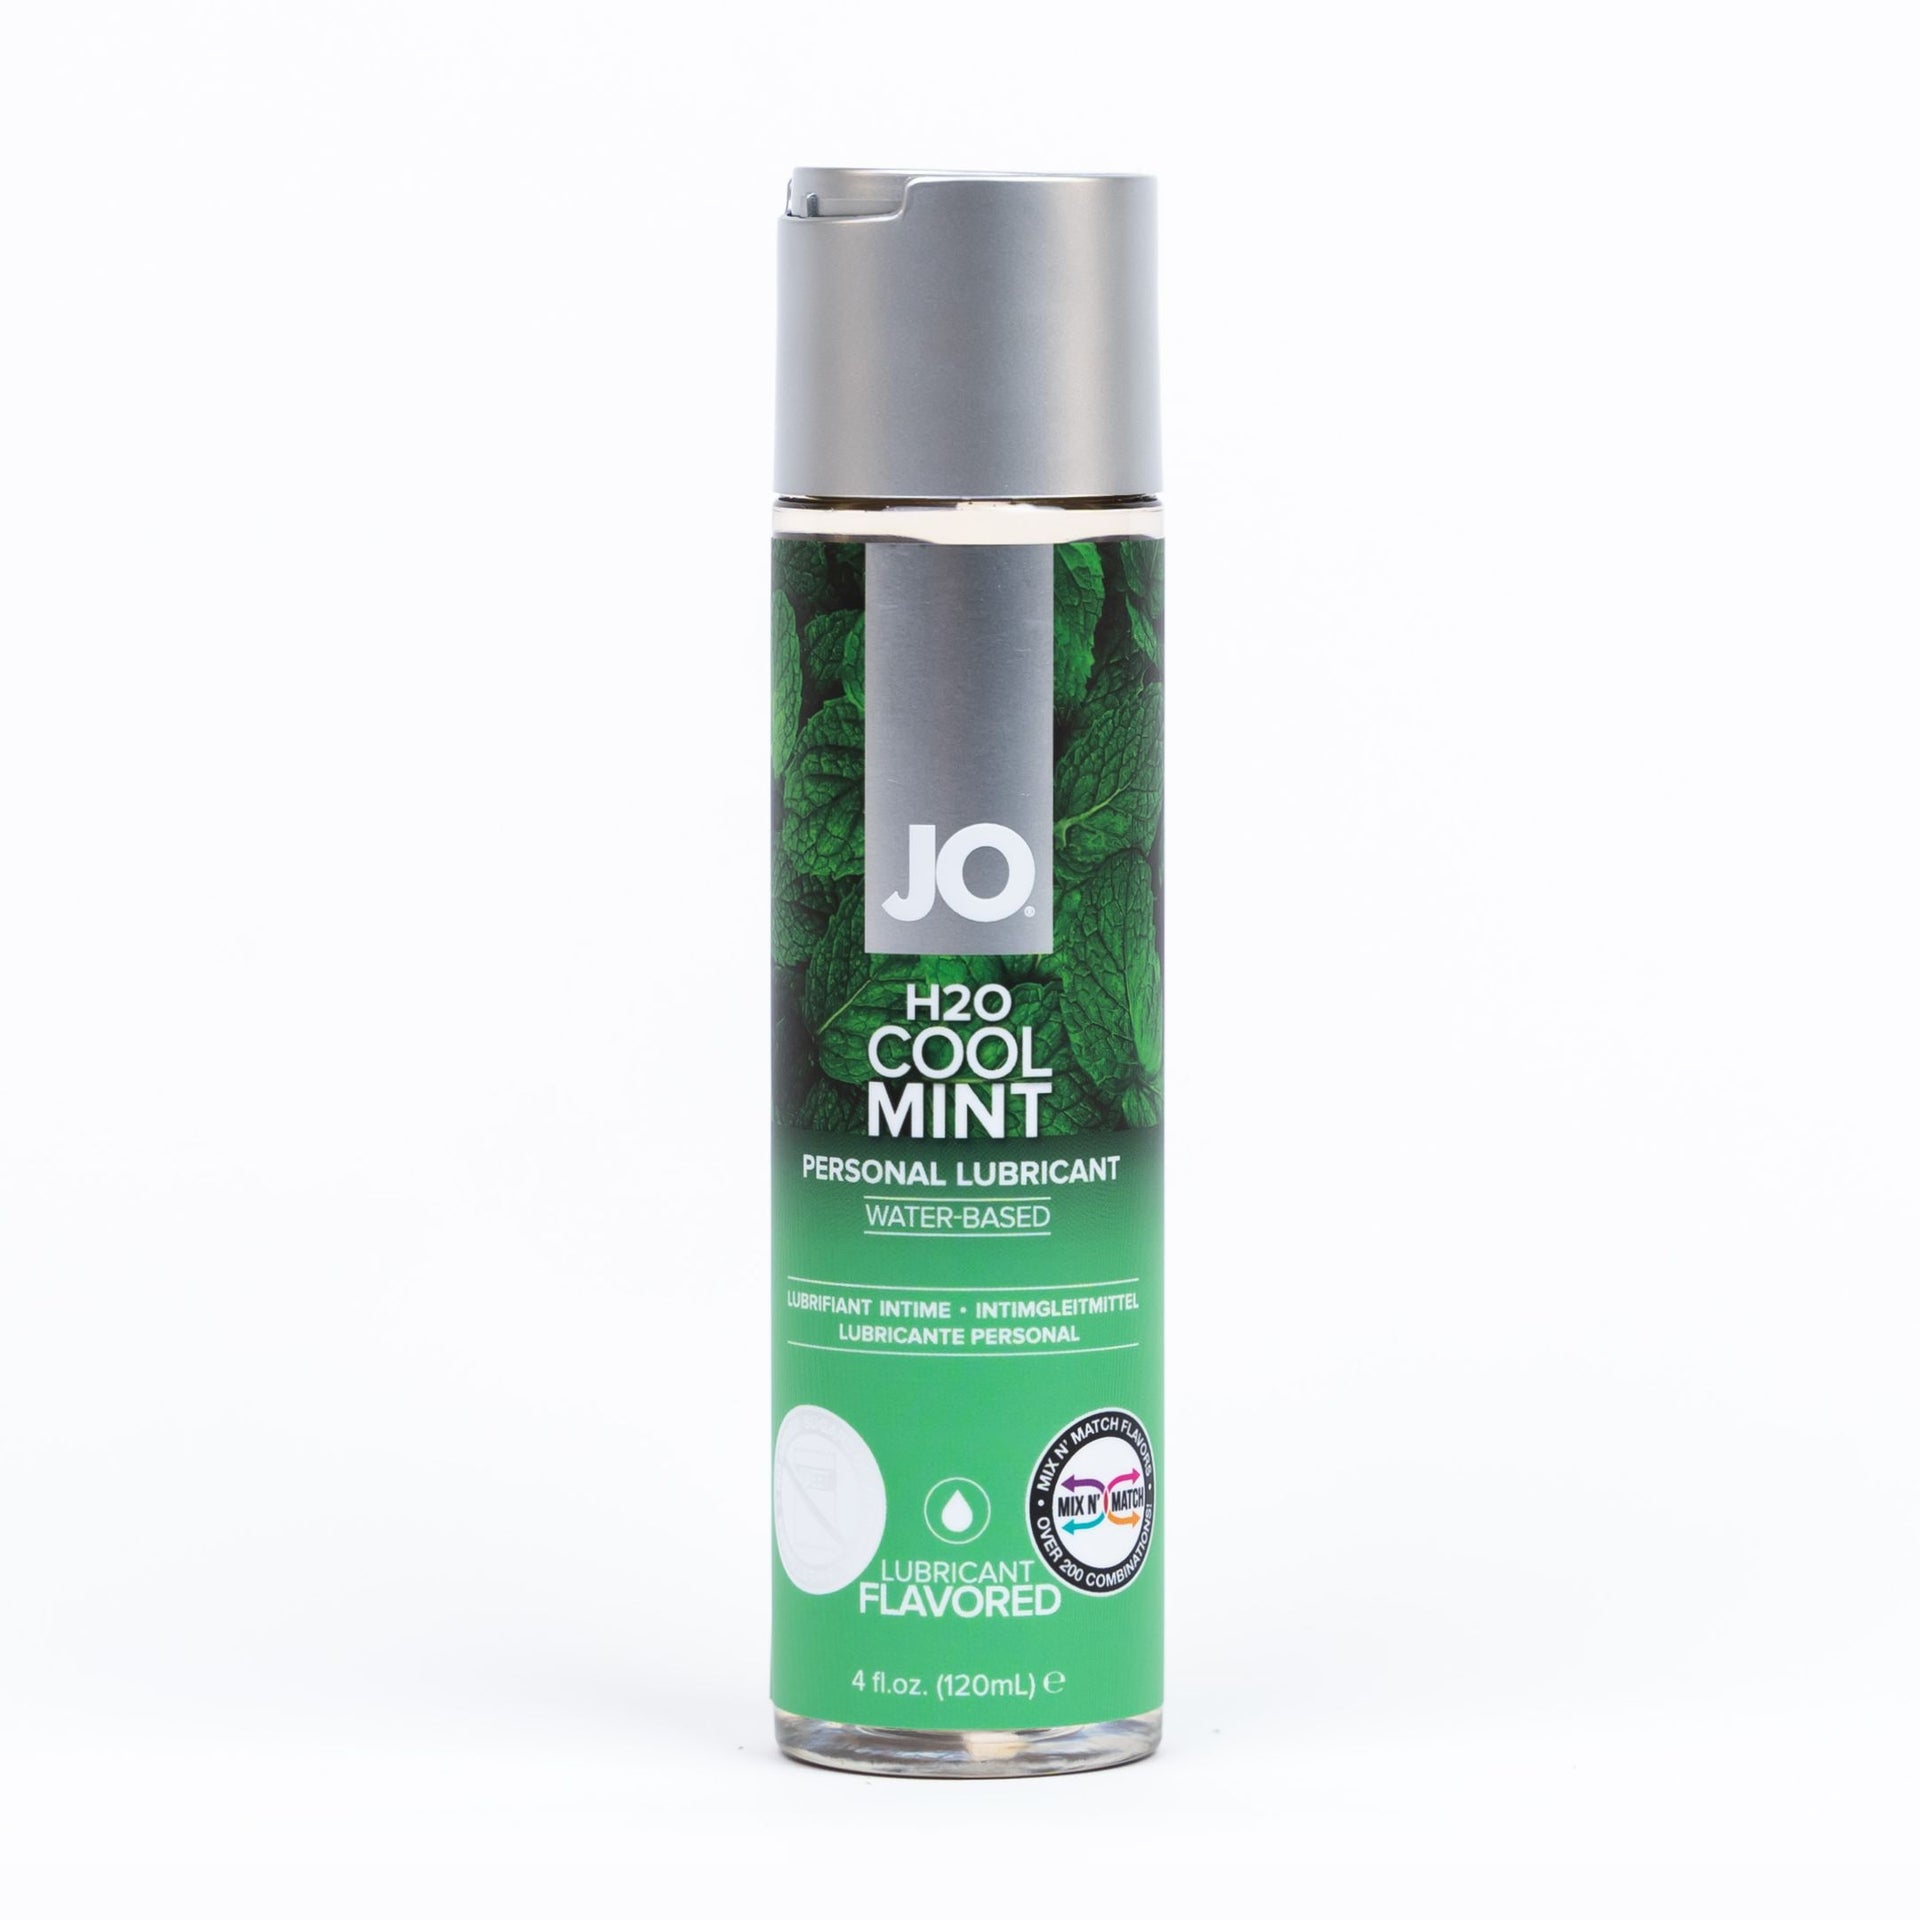 h20 cool mint lubricant front of pack